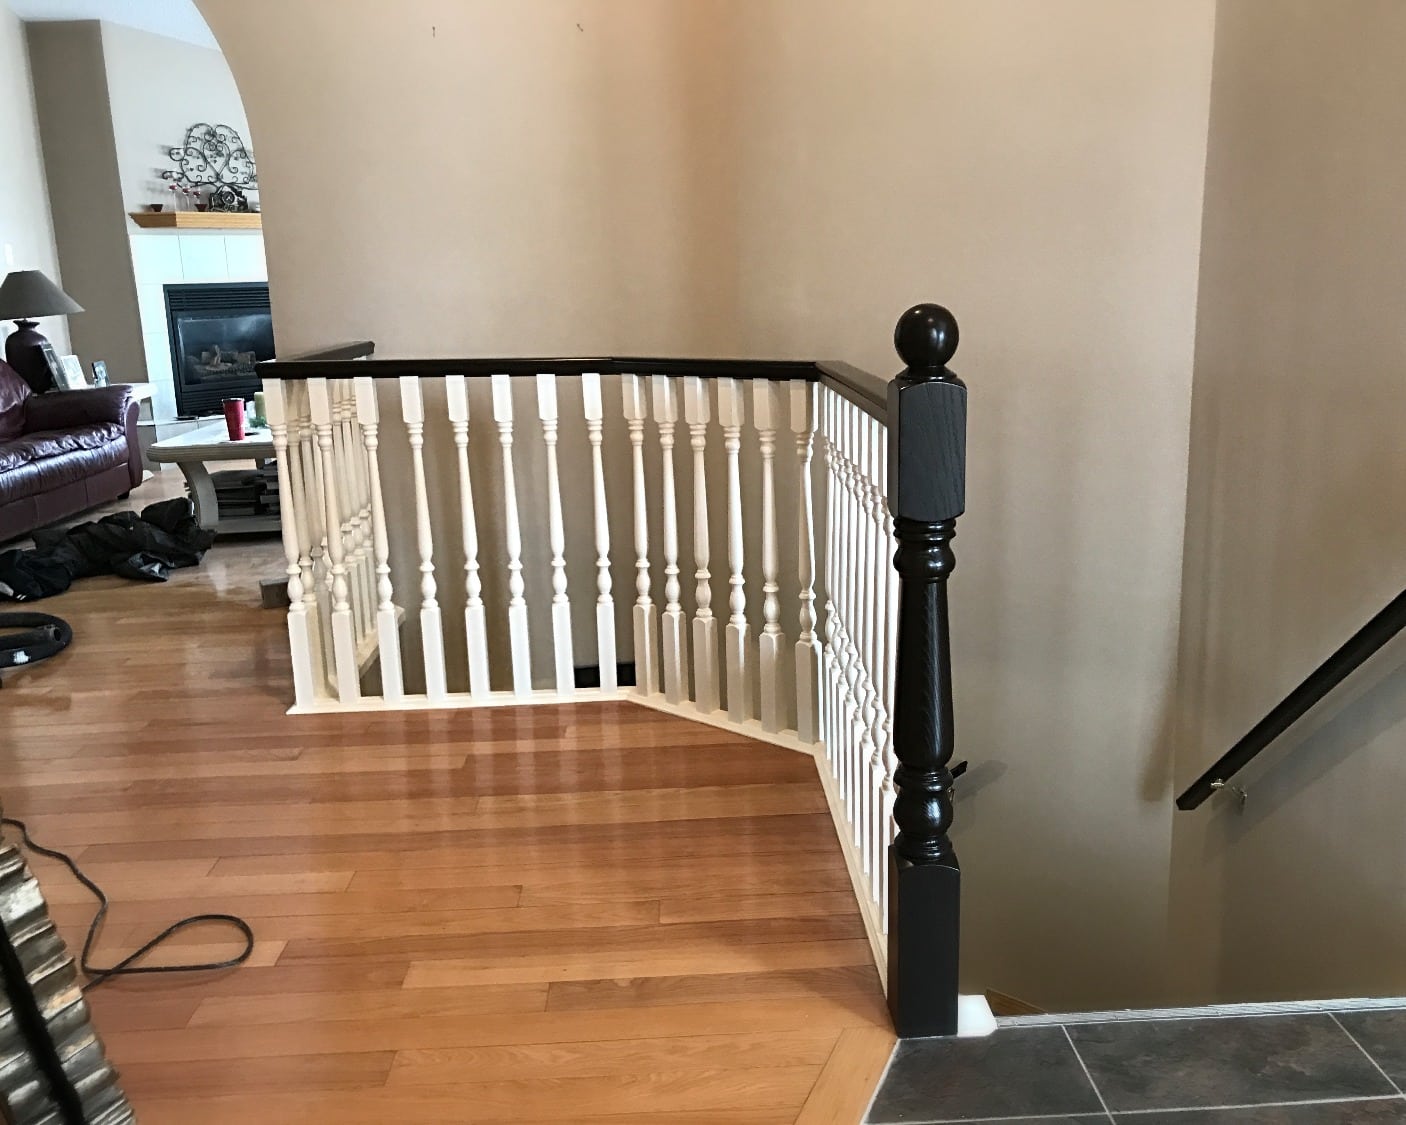 White and black lacquered railing after